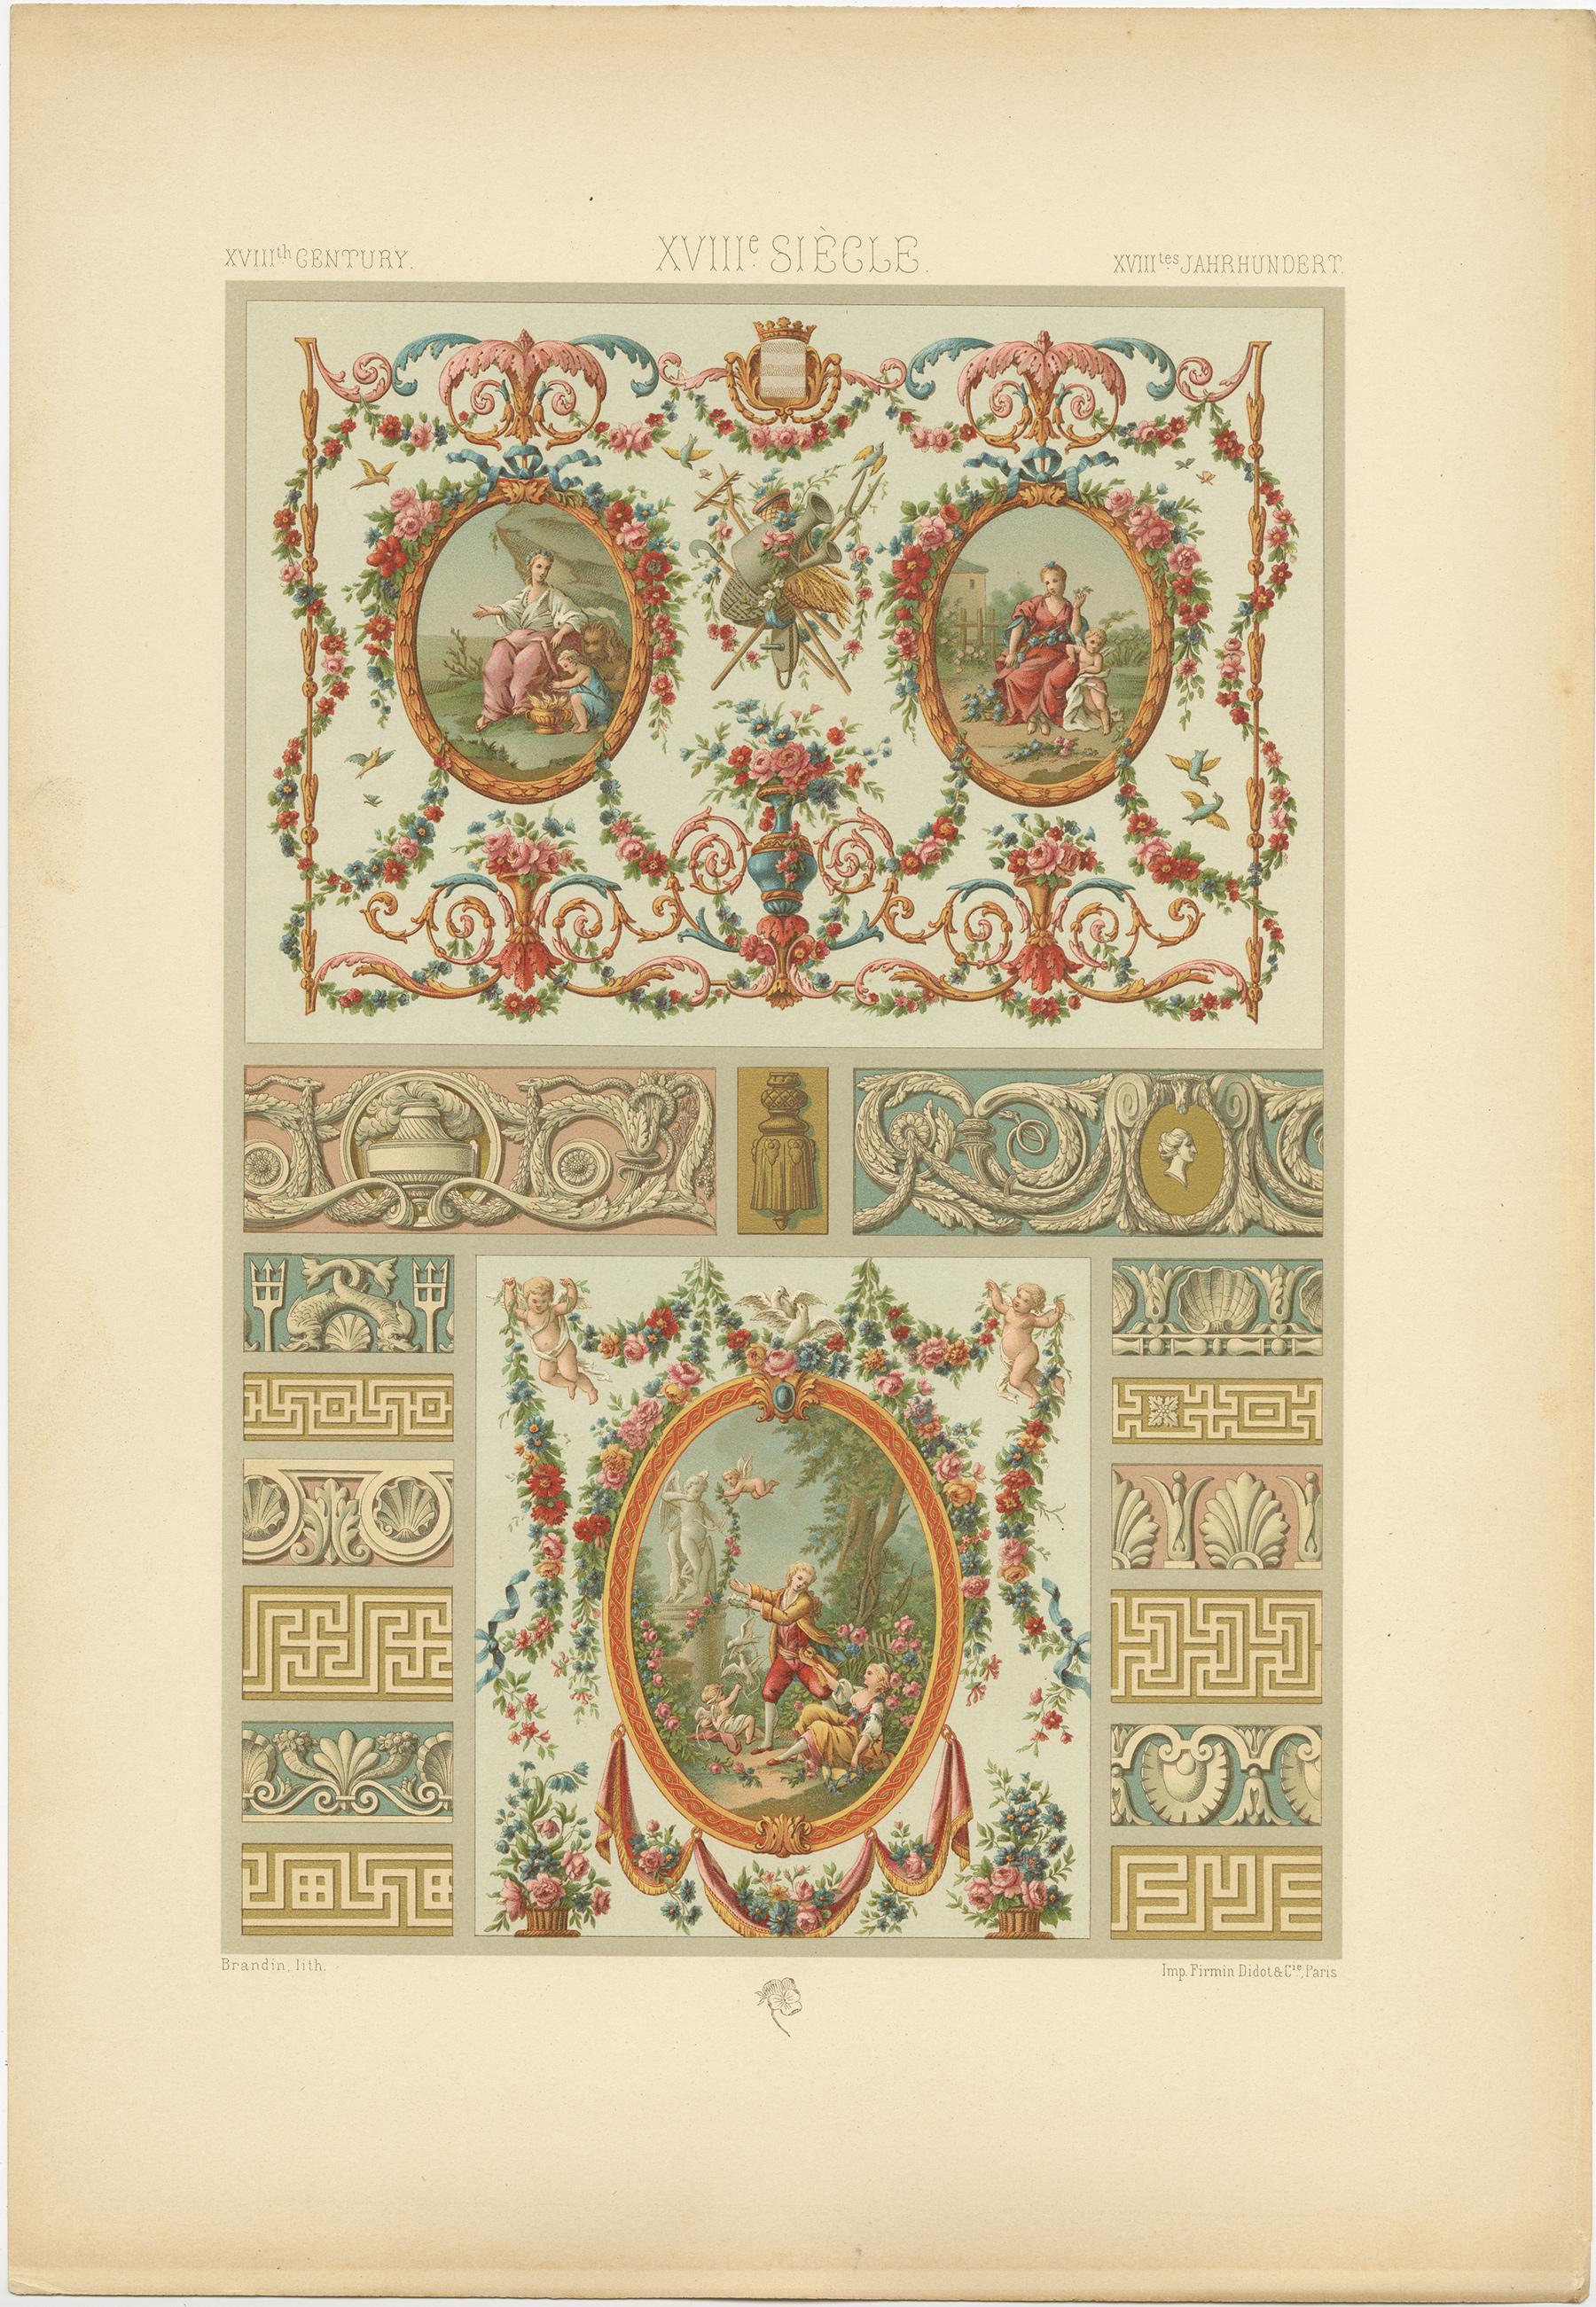 Antique print titled '18th Century - XIIIc Siècle -XVIIIles Jahrhundert'. Chromolithograph of details from French tapestries and wall panels ornaments. This print originates from 'l'Ornement Polychrome' by Auguste Racinet. Published circa 1890.